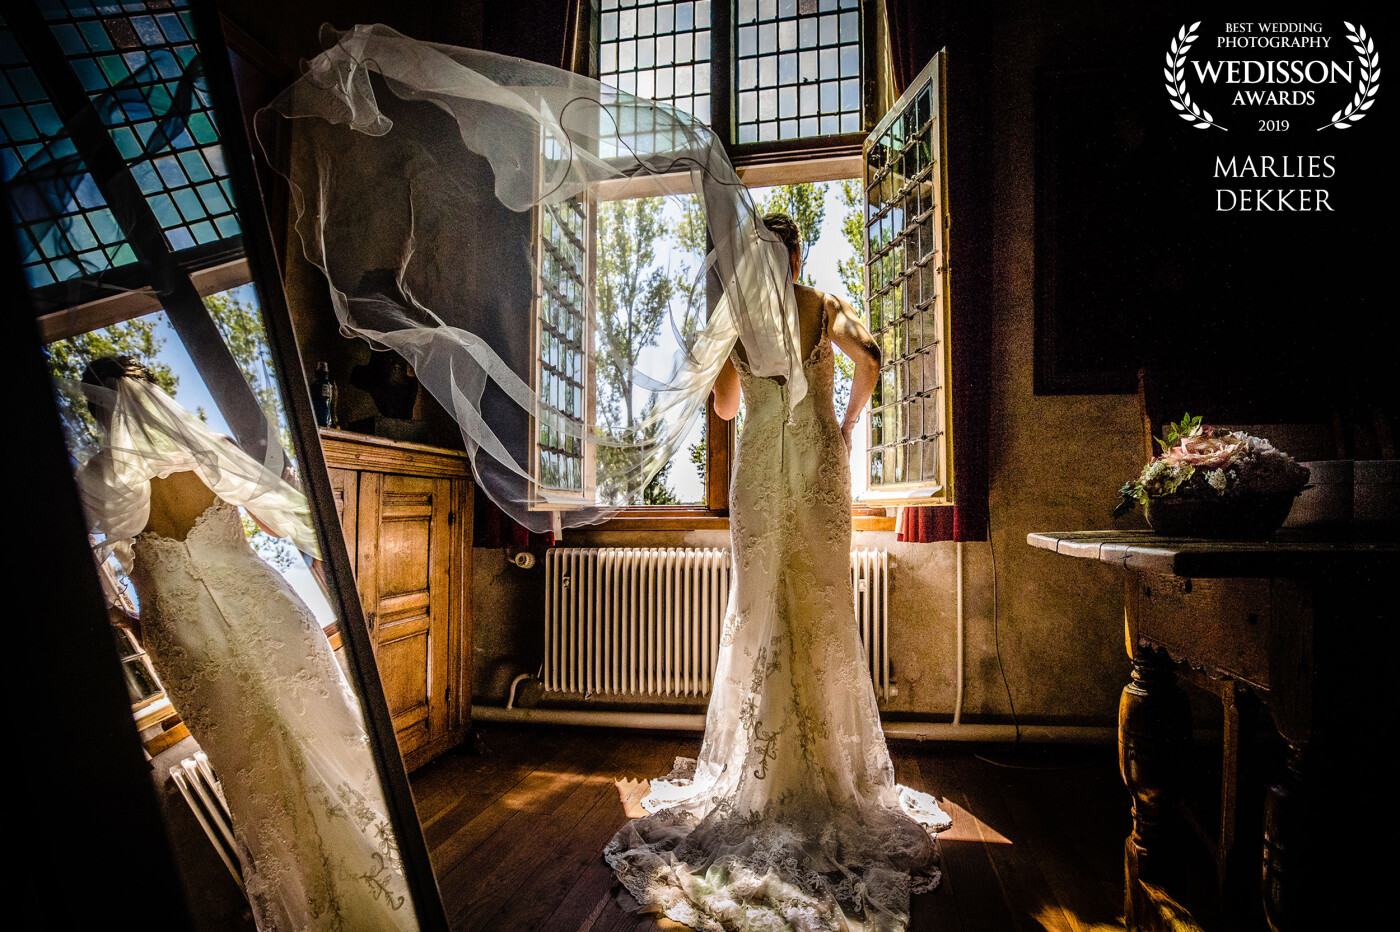 It was a very hot Dutch summer, which means when temperatures rise its most of the time quite hot and moisty. The Castle was warm as well and when the bride decided to open the window the wind came in to blow the veil away, the mirror did his own thing which made the scenery perfect for a shot like this.